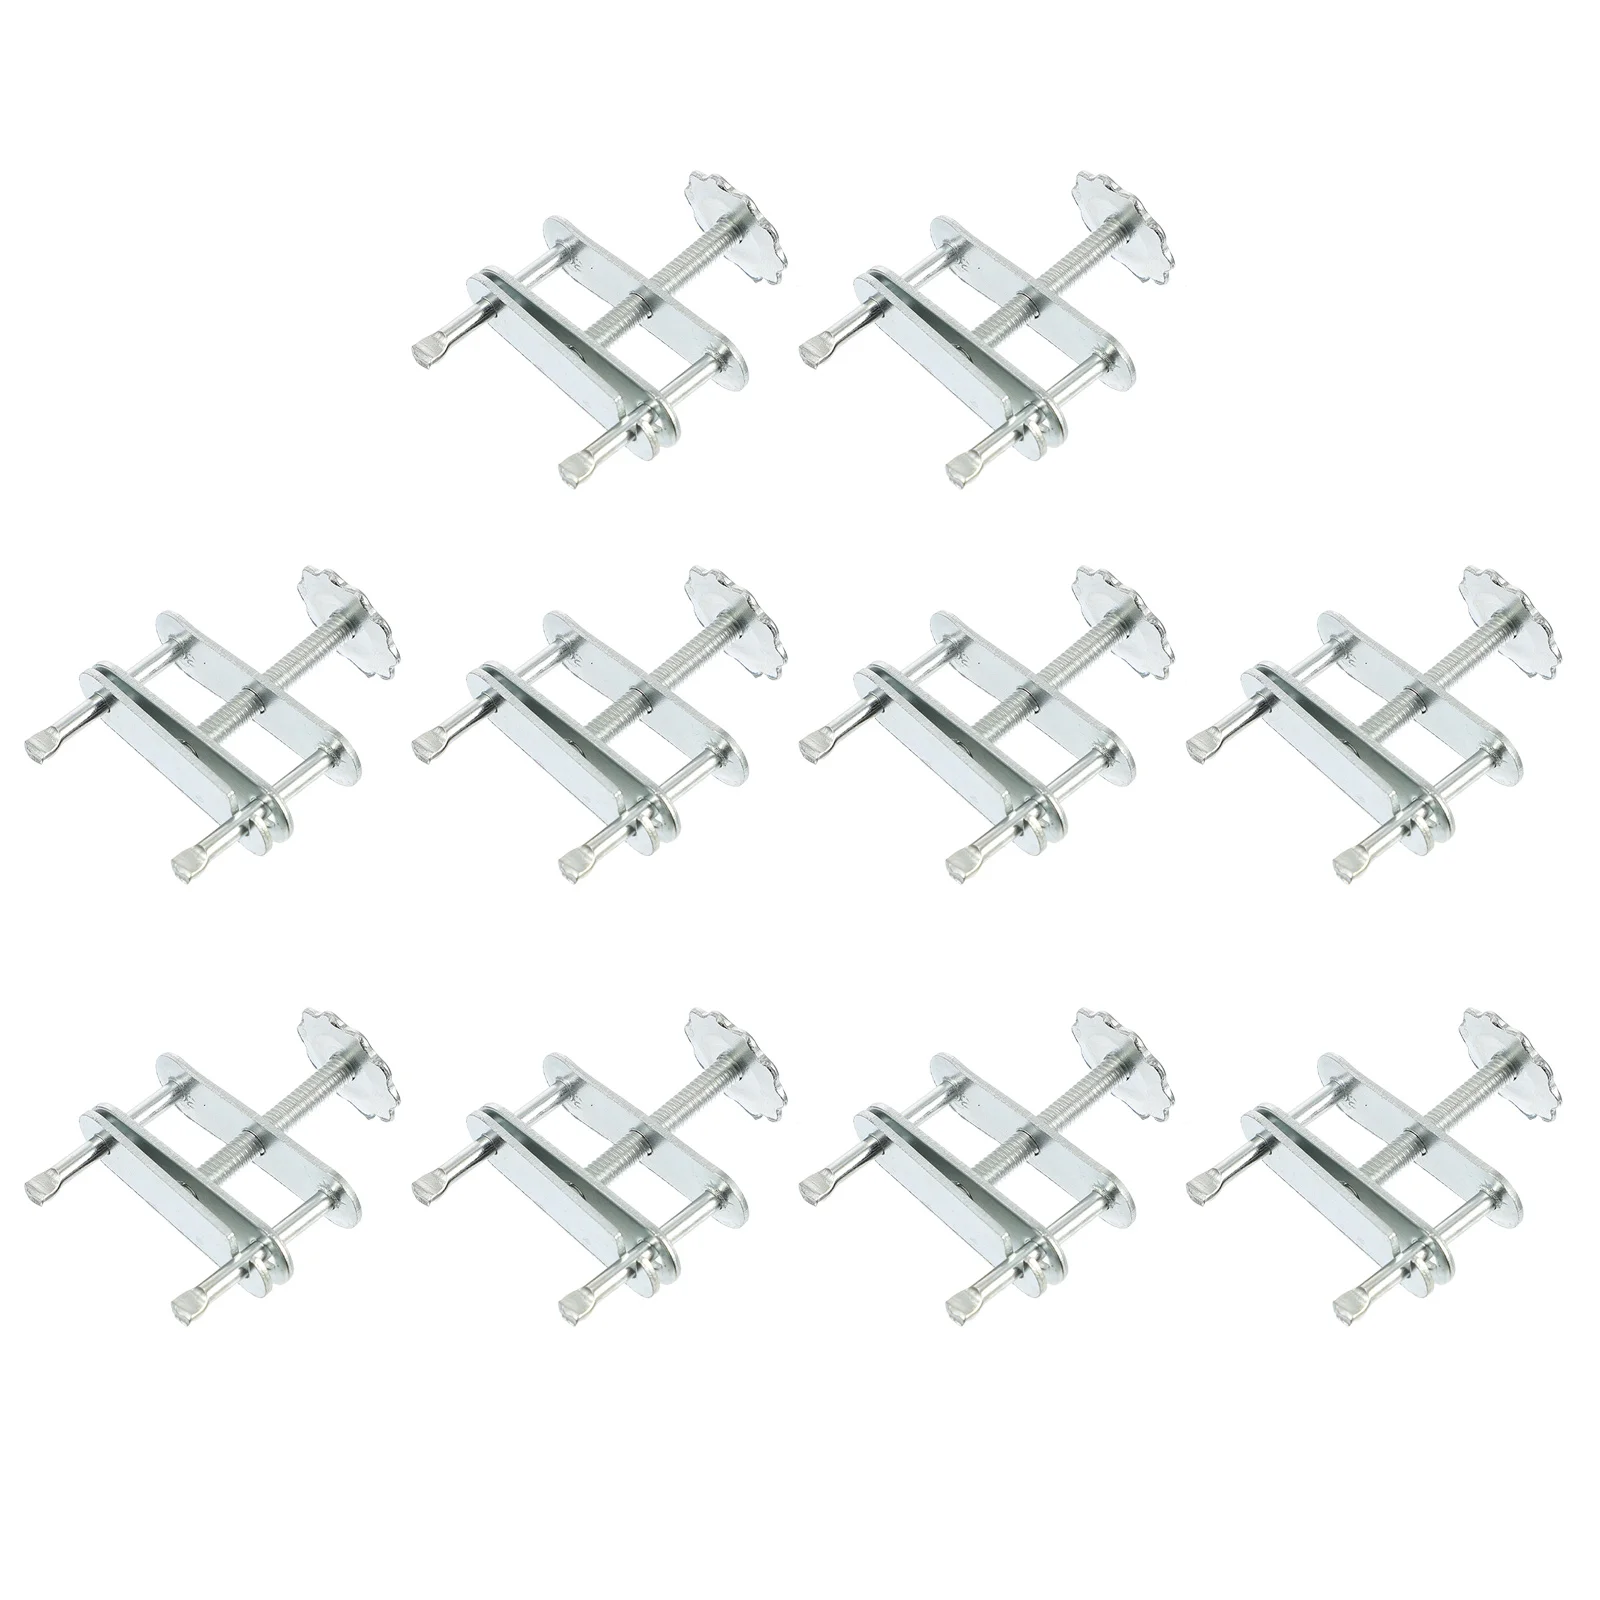 10 Pcs Waterproof Clip Stainless Steel Clamps Fixture Galvanized Iron Coil Spring Compressor